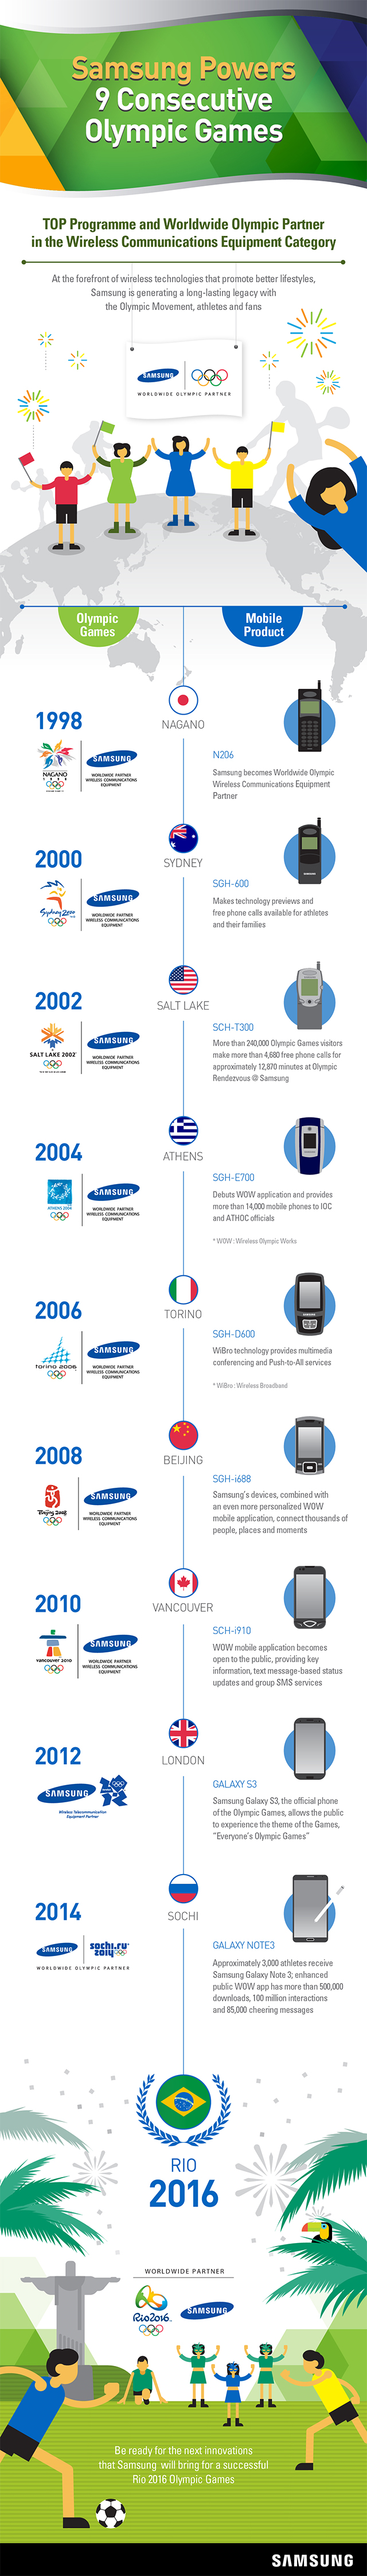 [Infographic] Samsung Powers 9 Consecutive Olympic Games